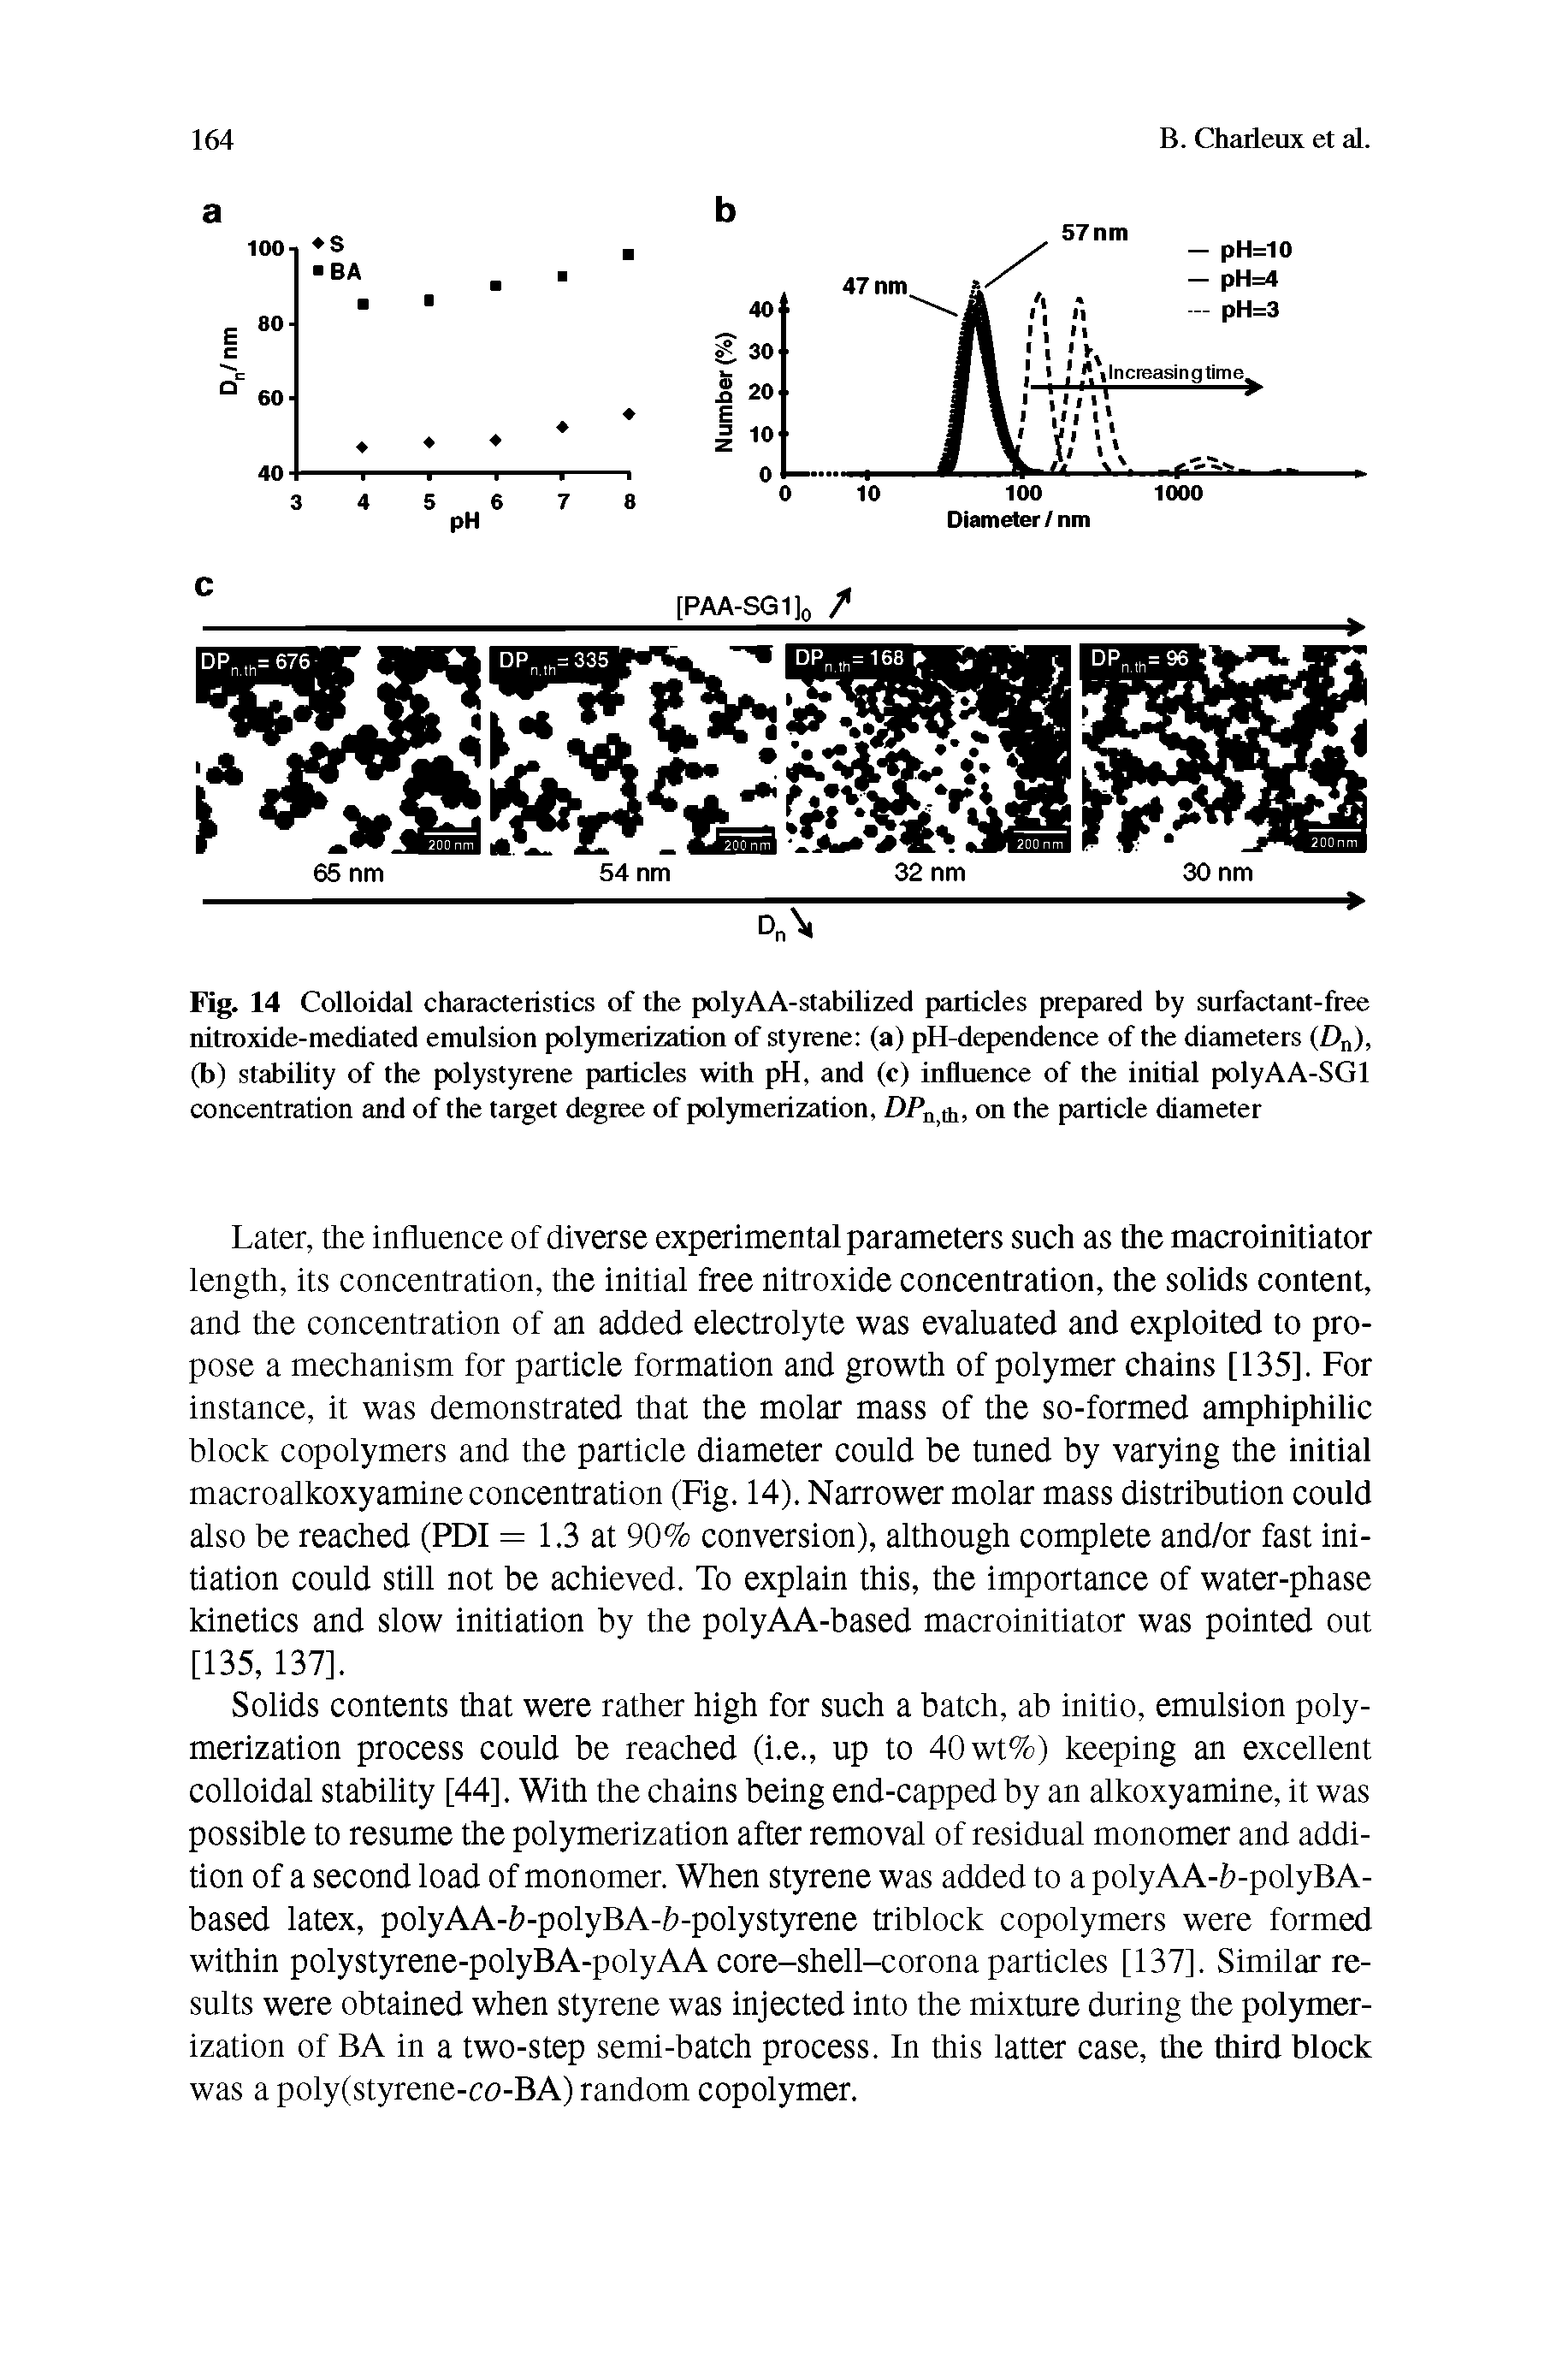 Fig. 14 Colloidal characteristics of the polyAA-stabilized particles prepared by surfactant-free nitroxide-mediated emulsion polymerization of styrene (a) pH-dependence of the diameters ( ), (b) stability of the polystyrene particles with pH, and (c) influence of the initial polyAA-SGl concentration and of the target degree of polymerization, )Pn,th, on the particle diameter...